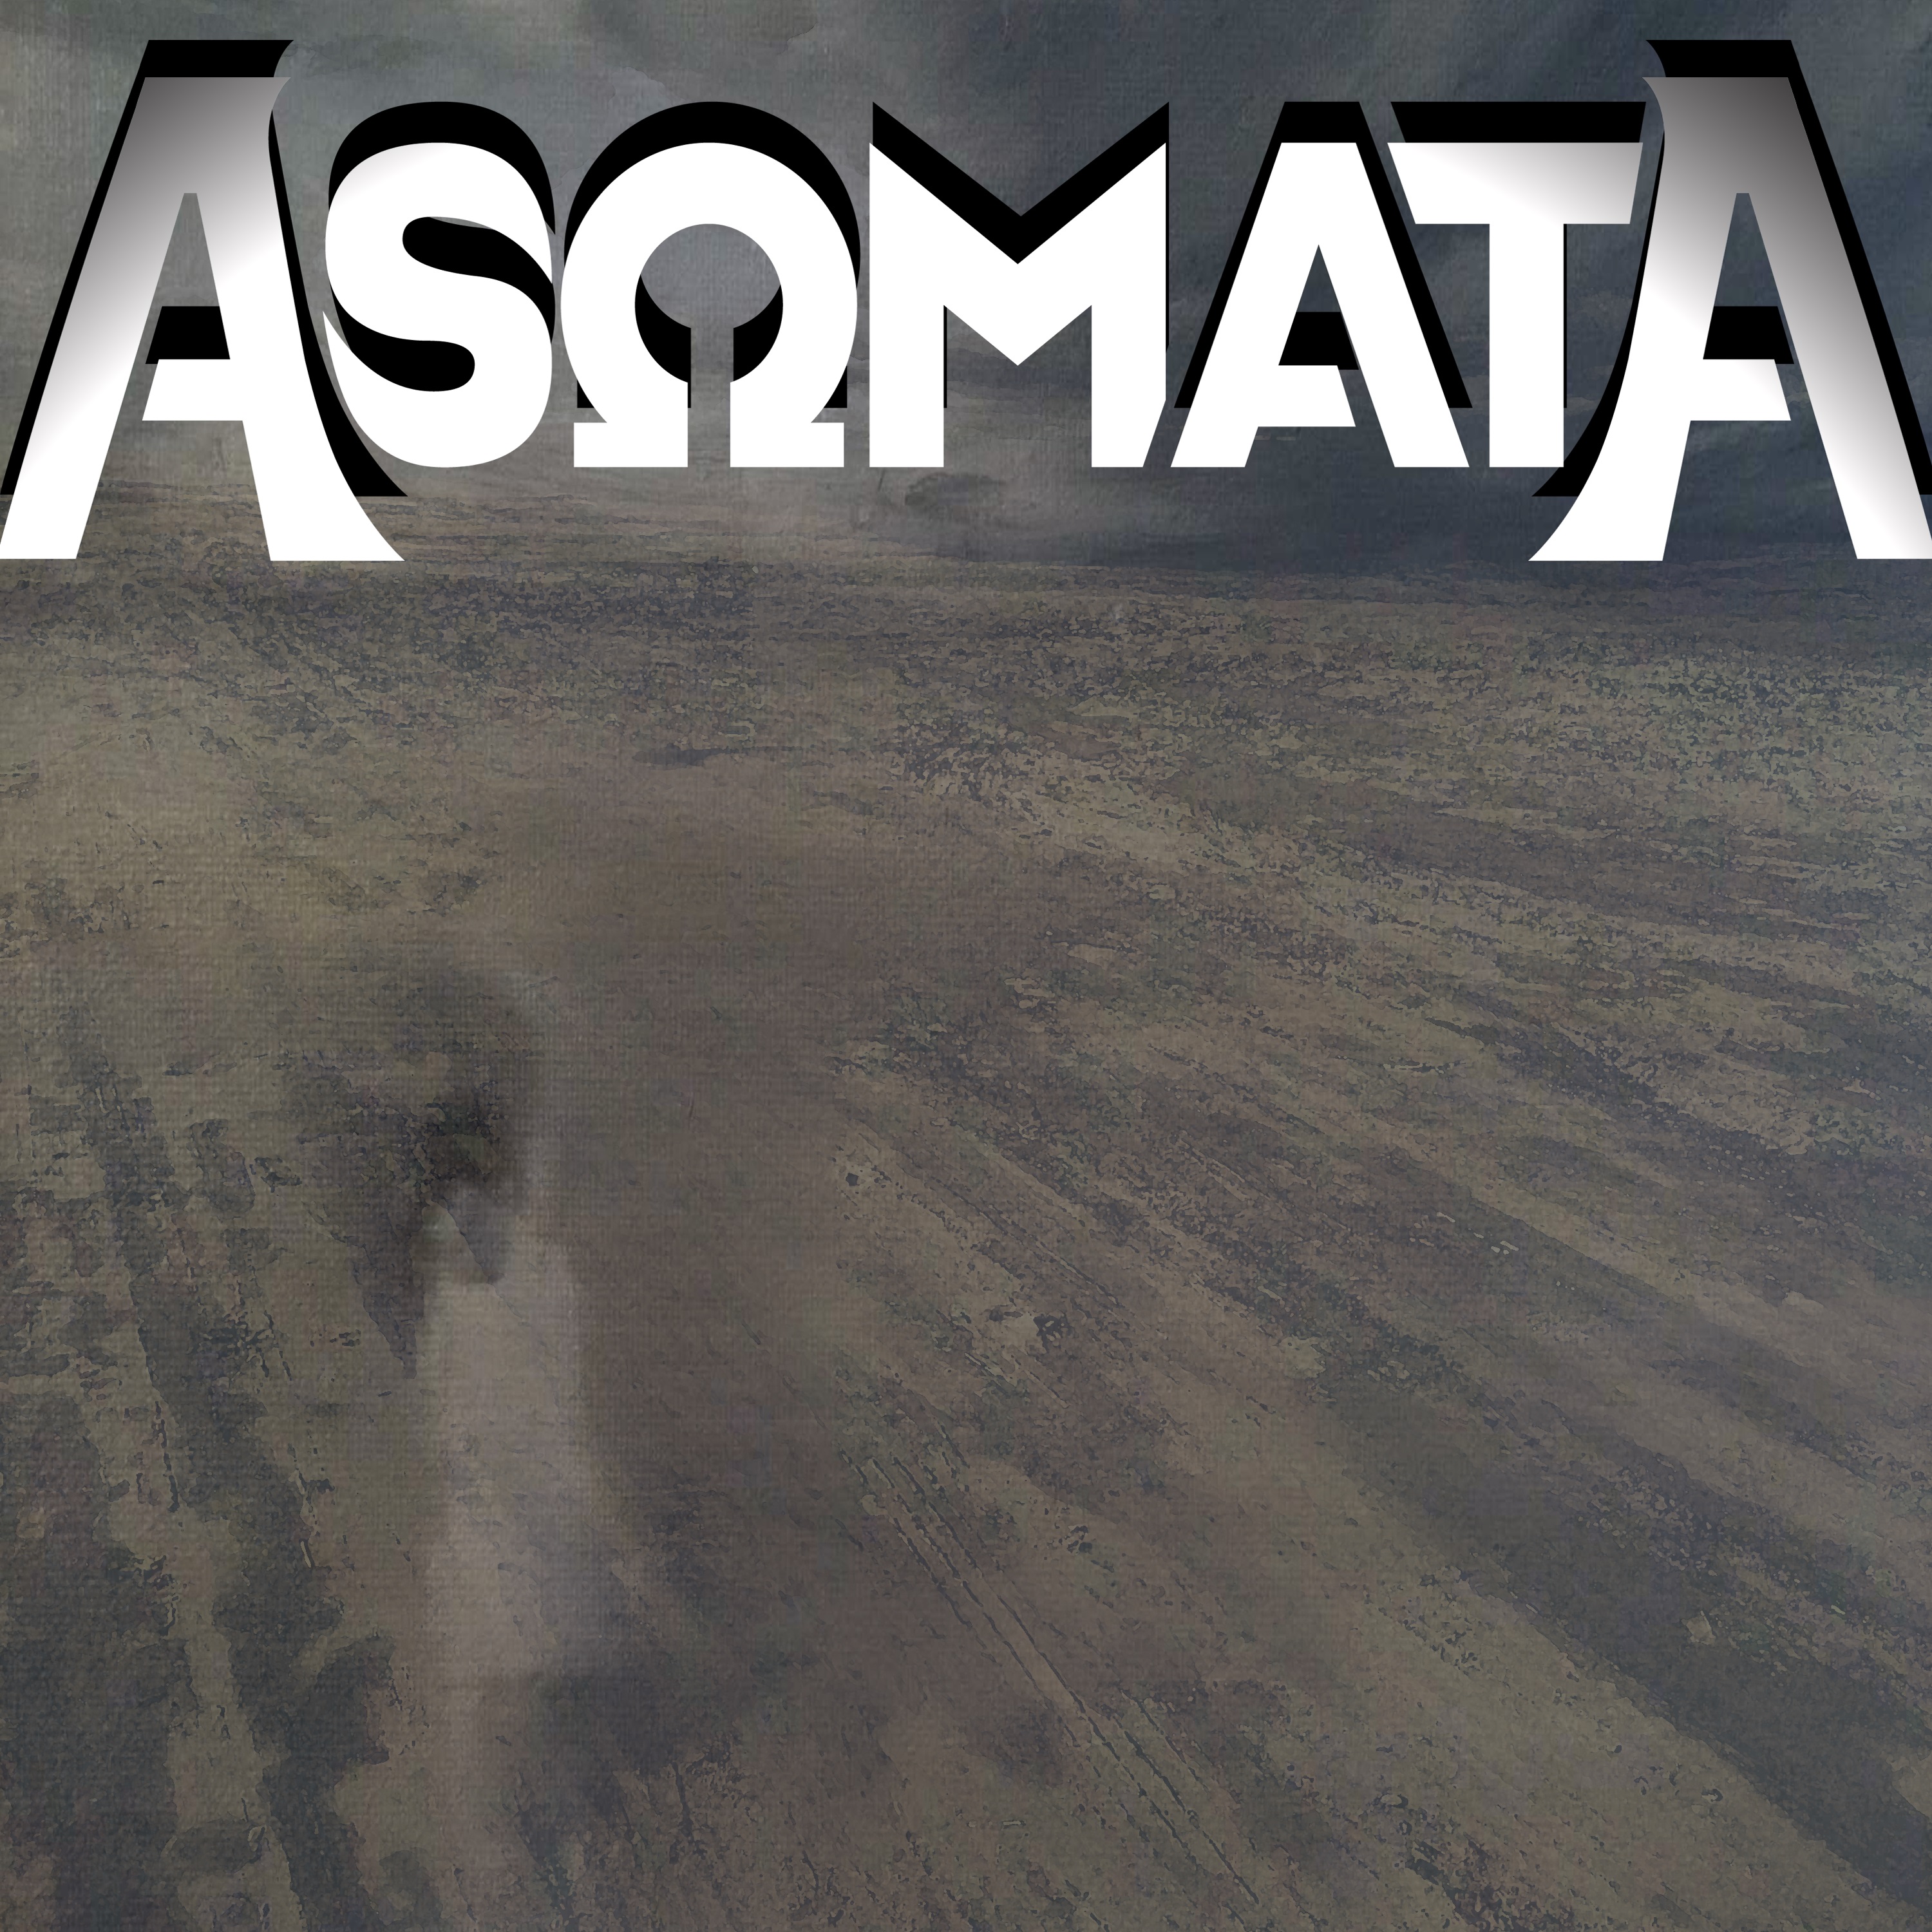 ASOMATA Rocks Your Socks Off with a Debut EP